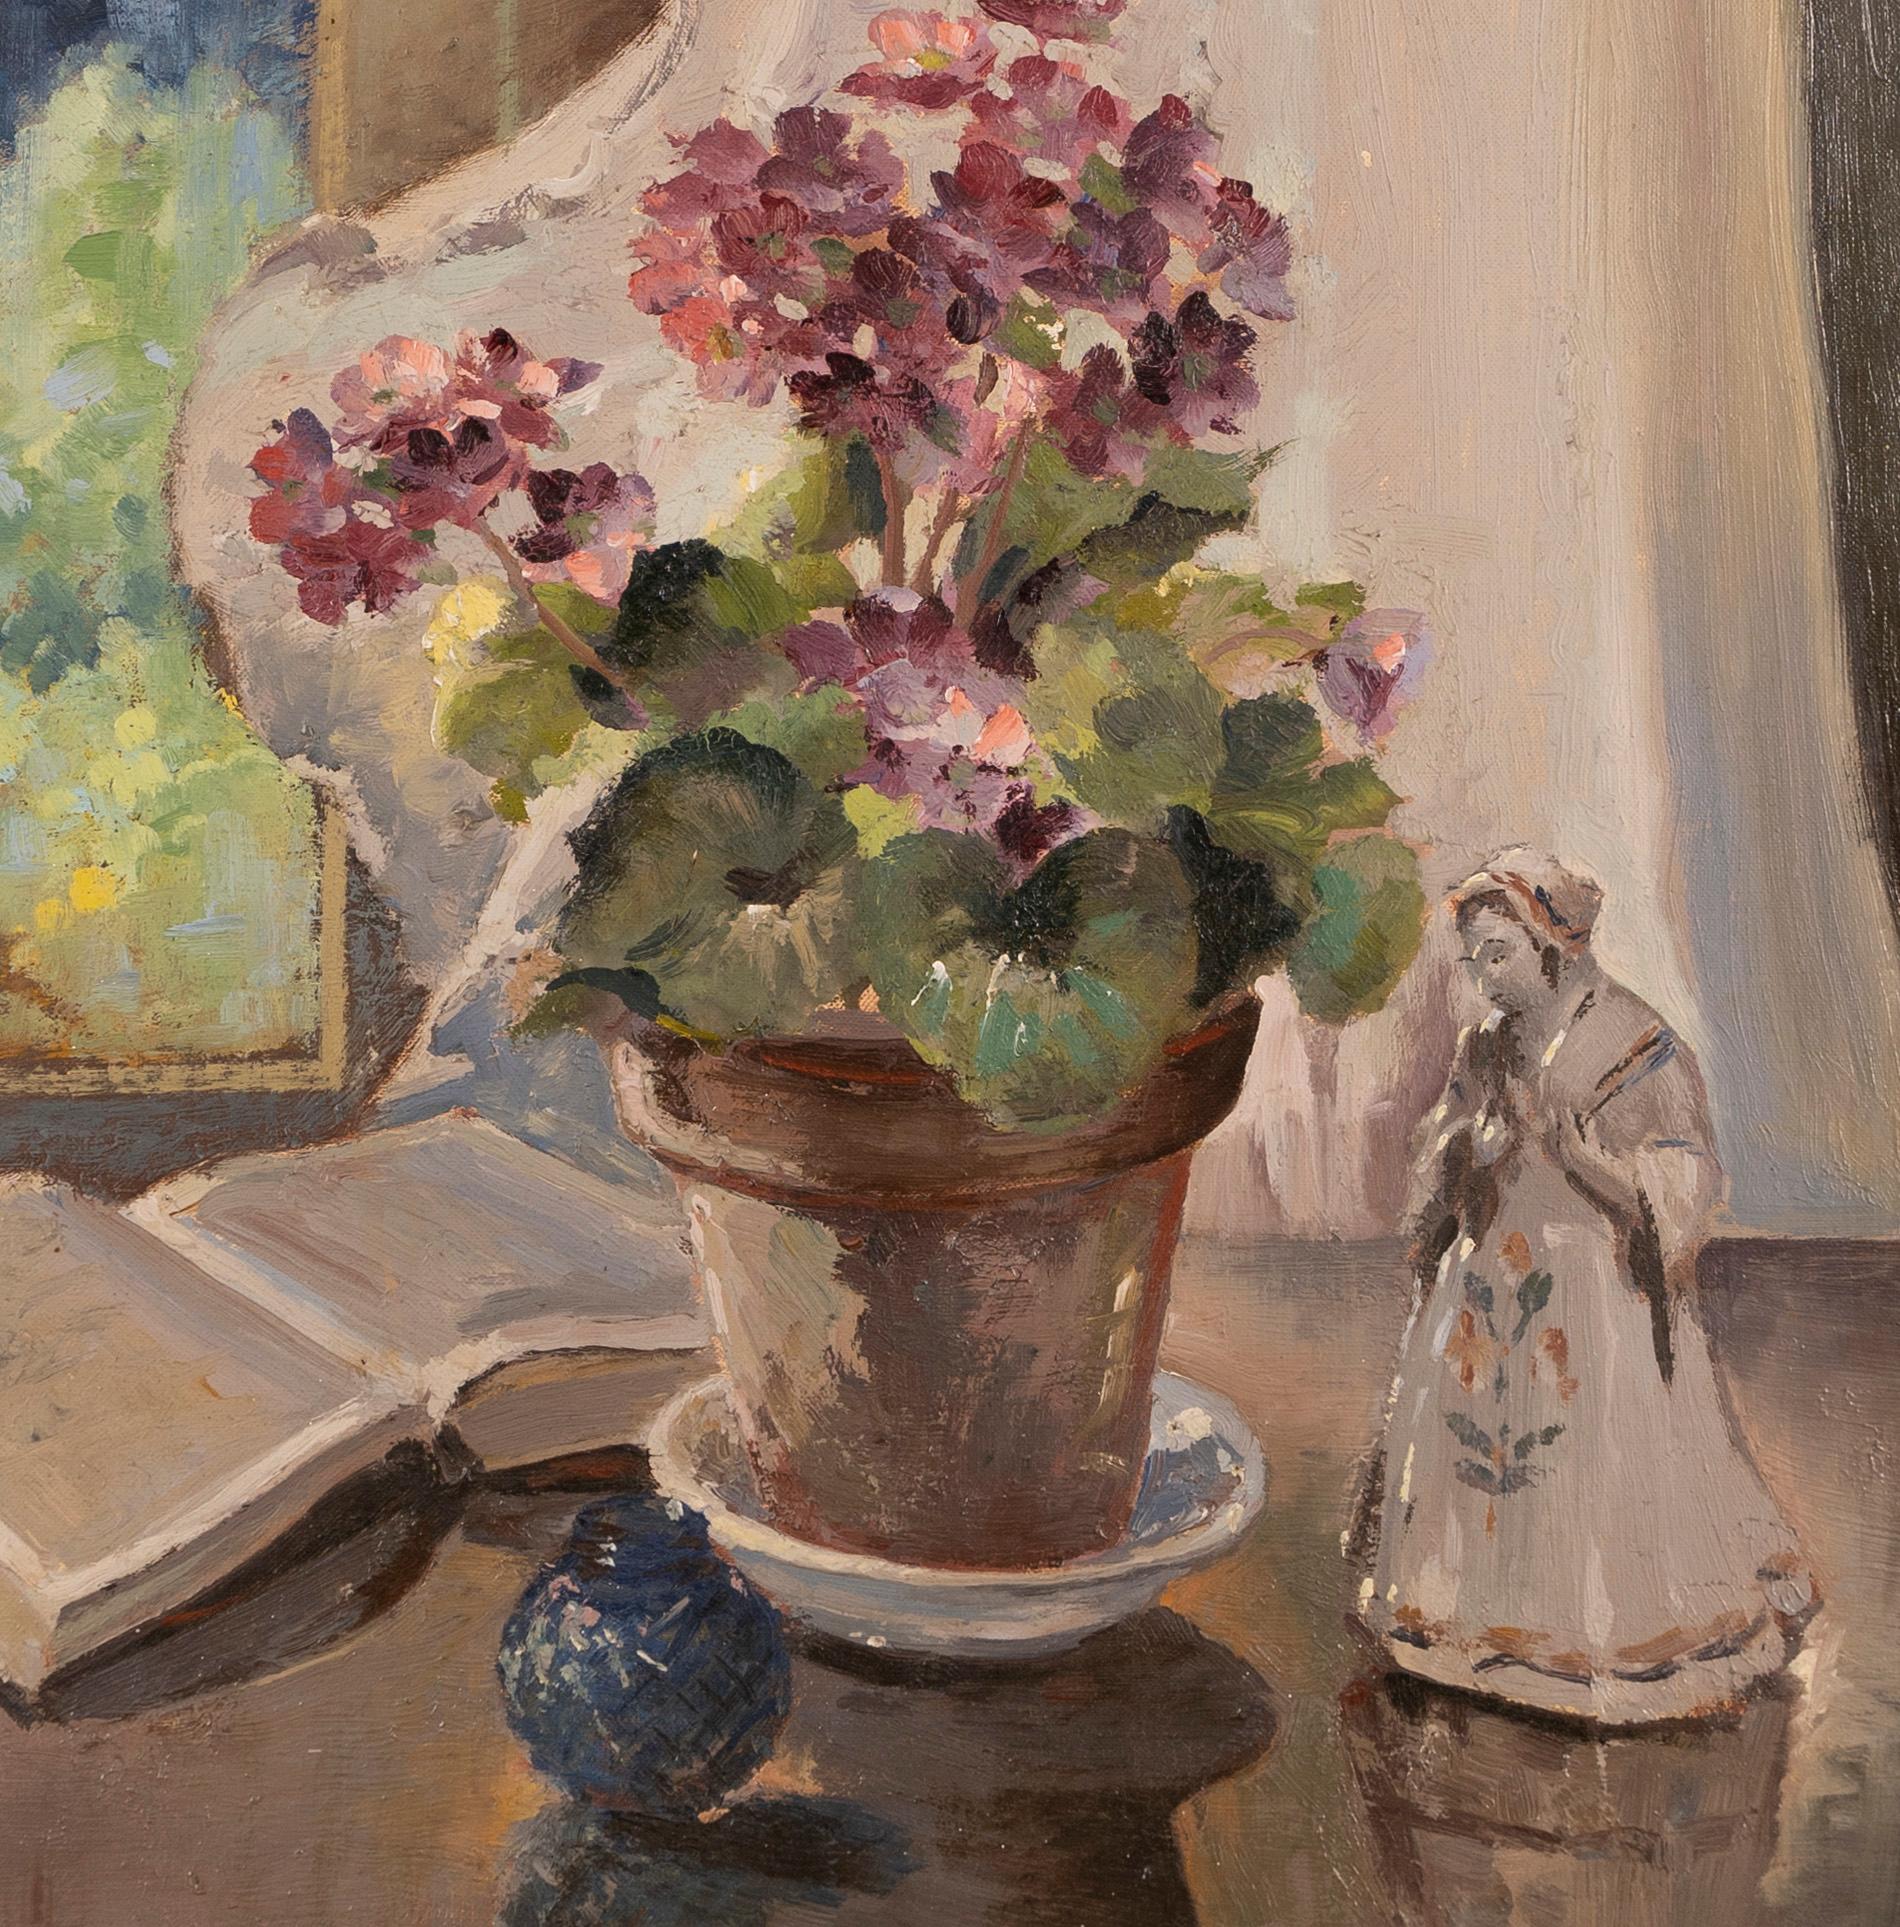 Antique impressionist still life painting by Irene ( I. Stry) Stry (1899/1904 - 1963).  Oil on board, circa 1940.  Signé.  Image size, 24L x 20H.  